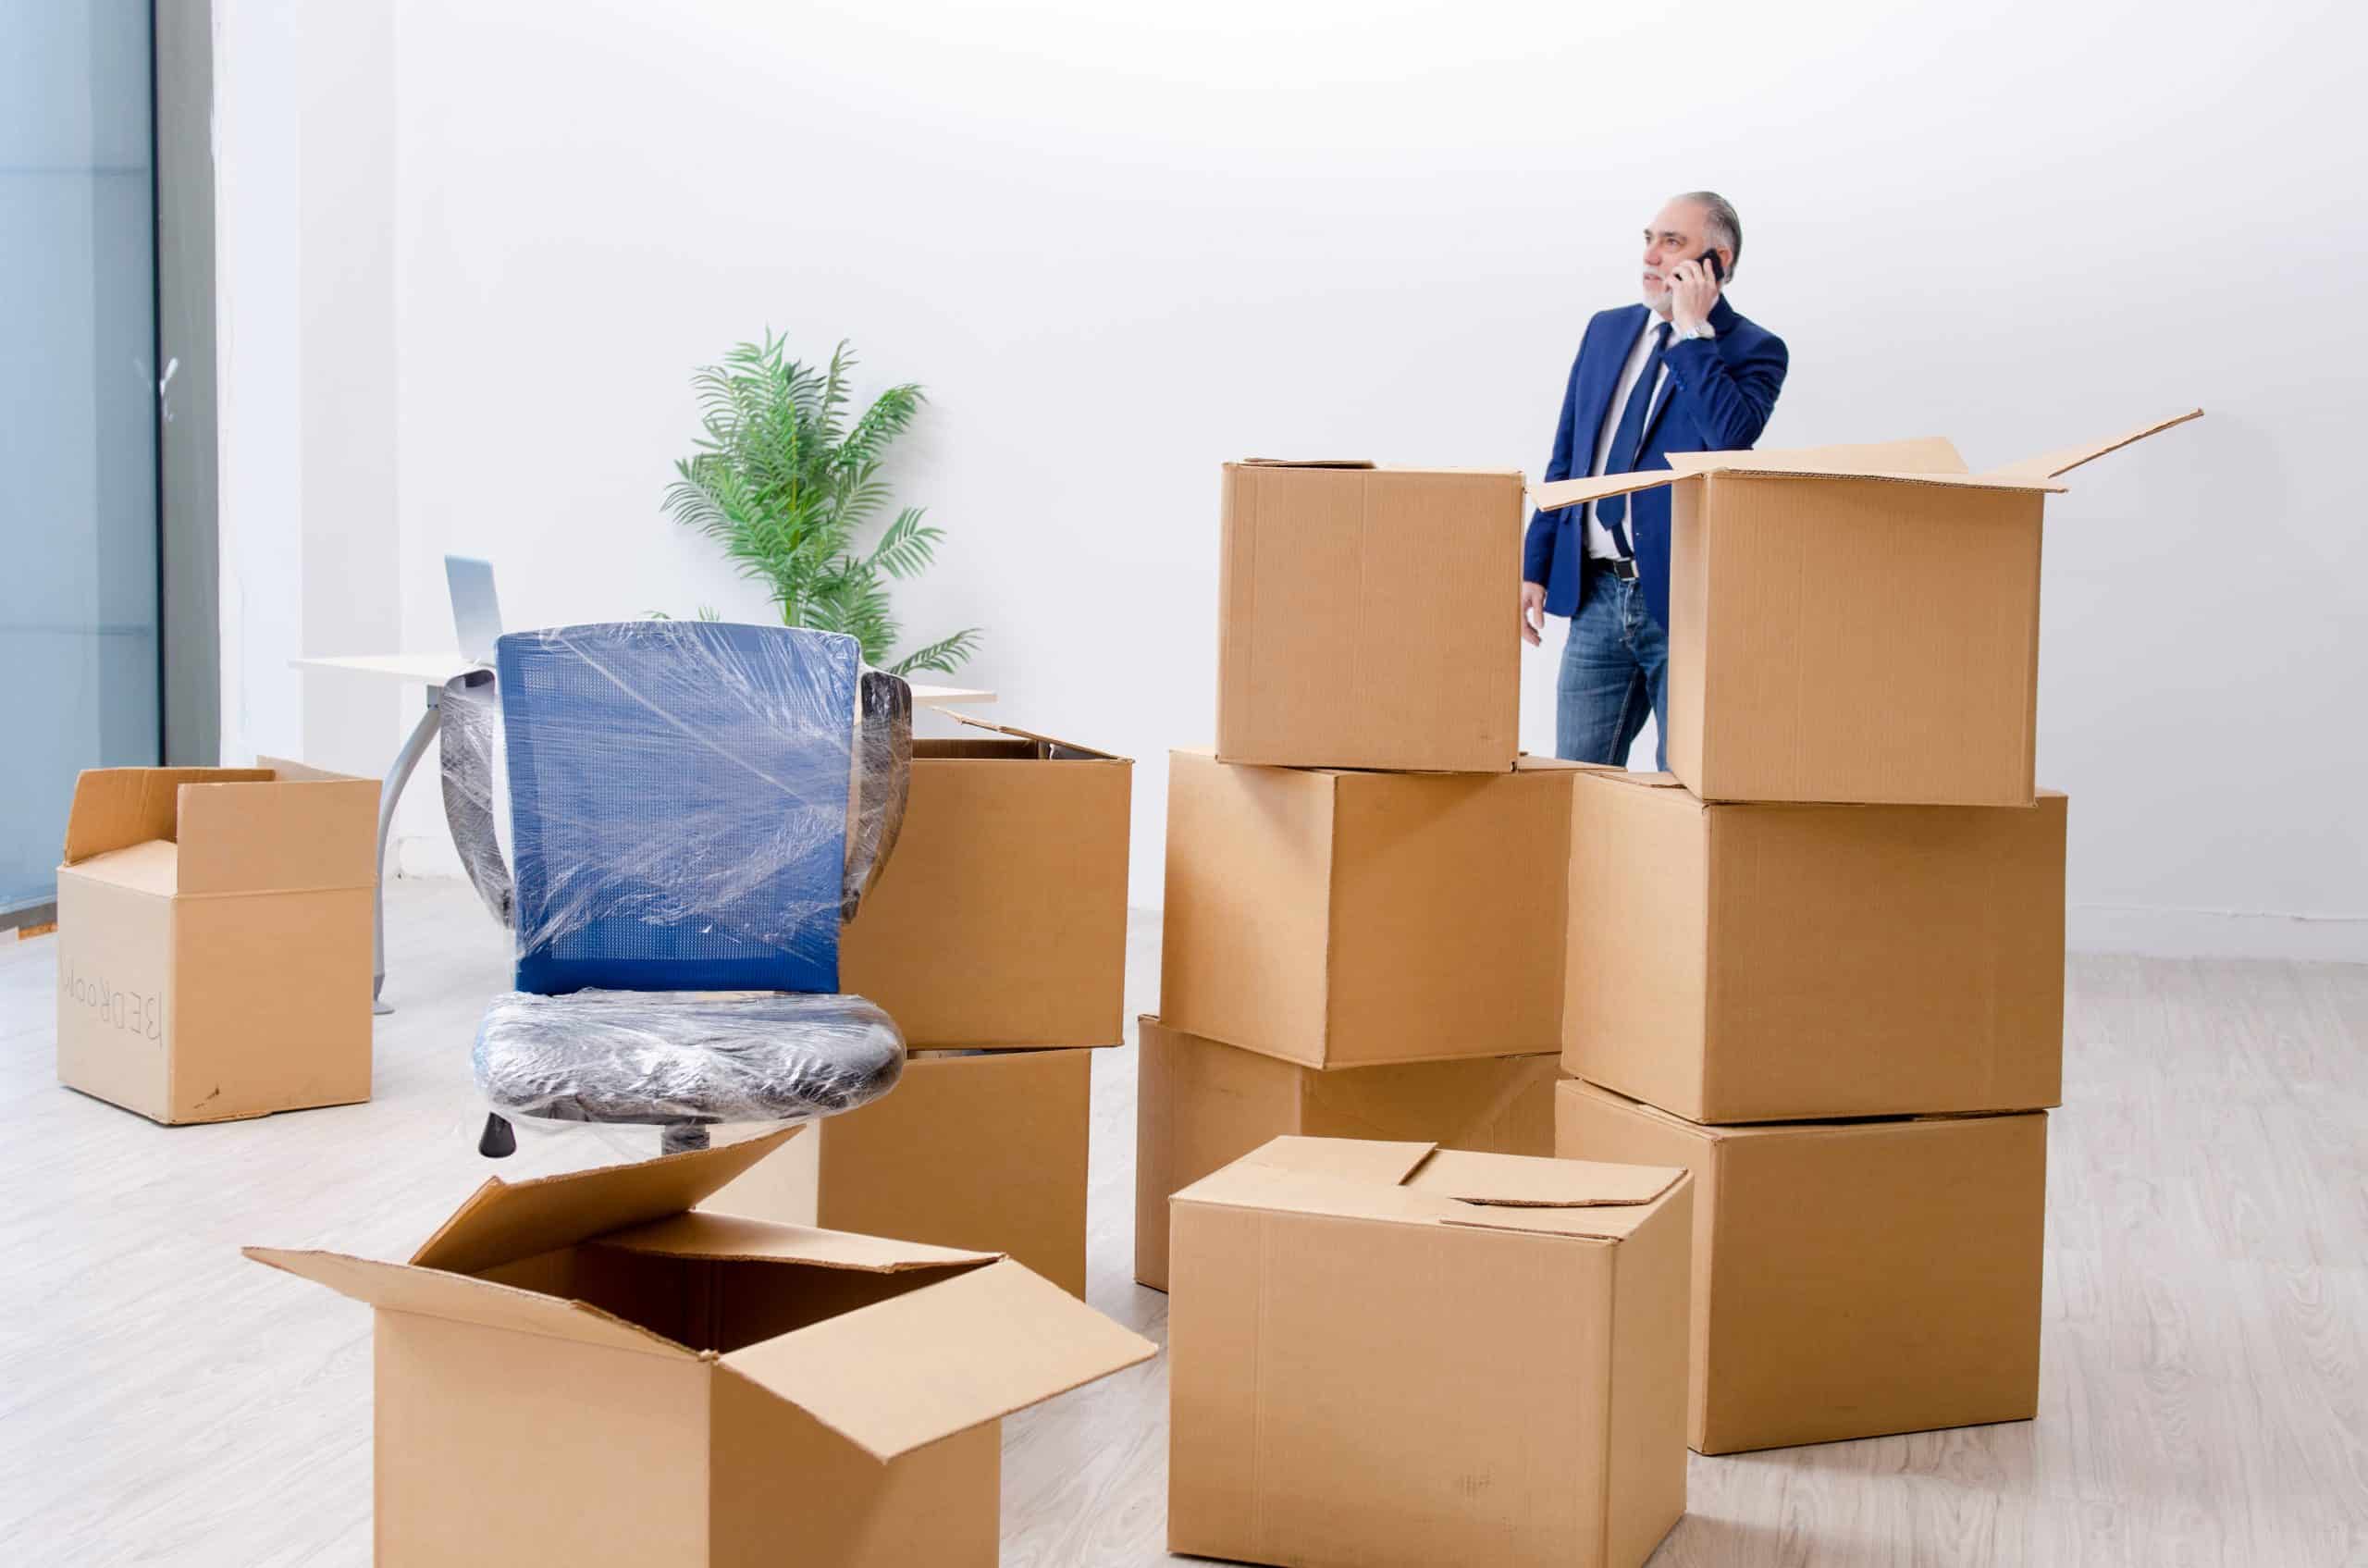 Man standing surrounded by boxes after deciding to downsize his office and move the boxes to a storage unit